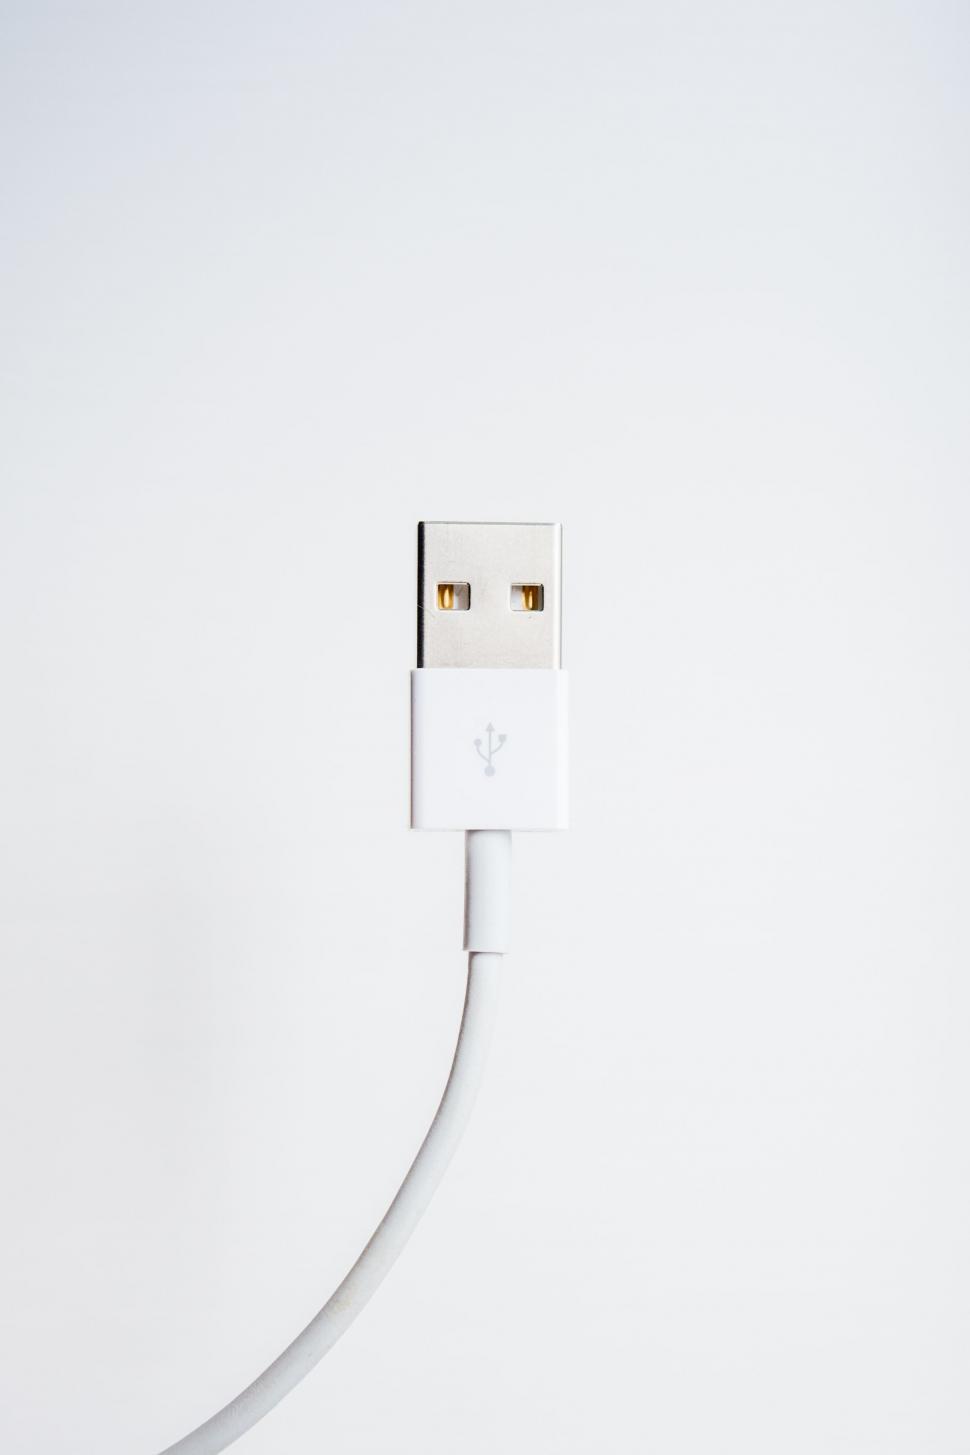 Free Image of Close Up of White Wall Charger 